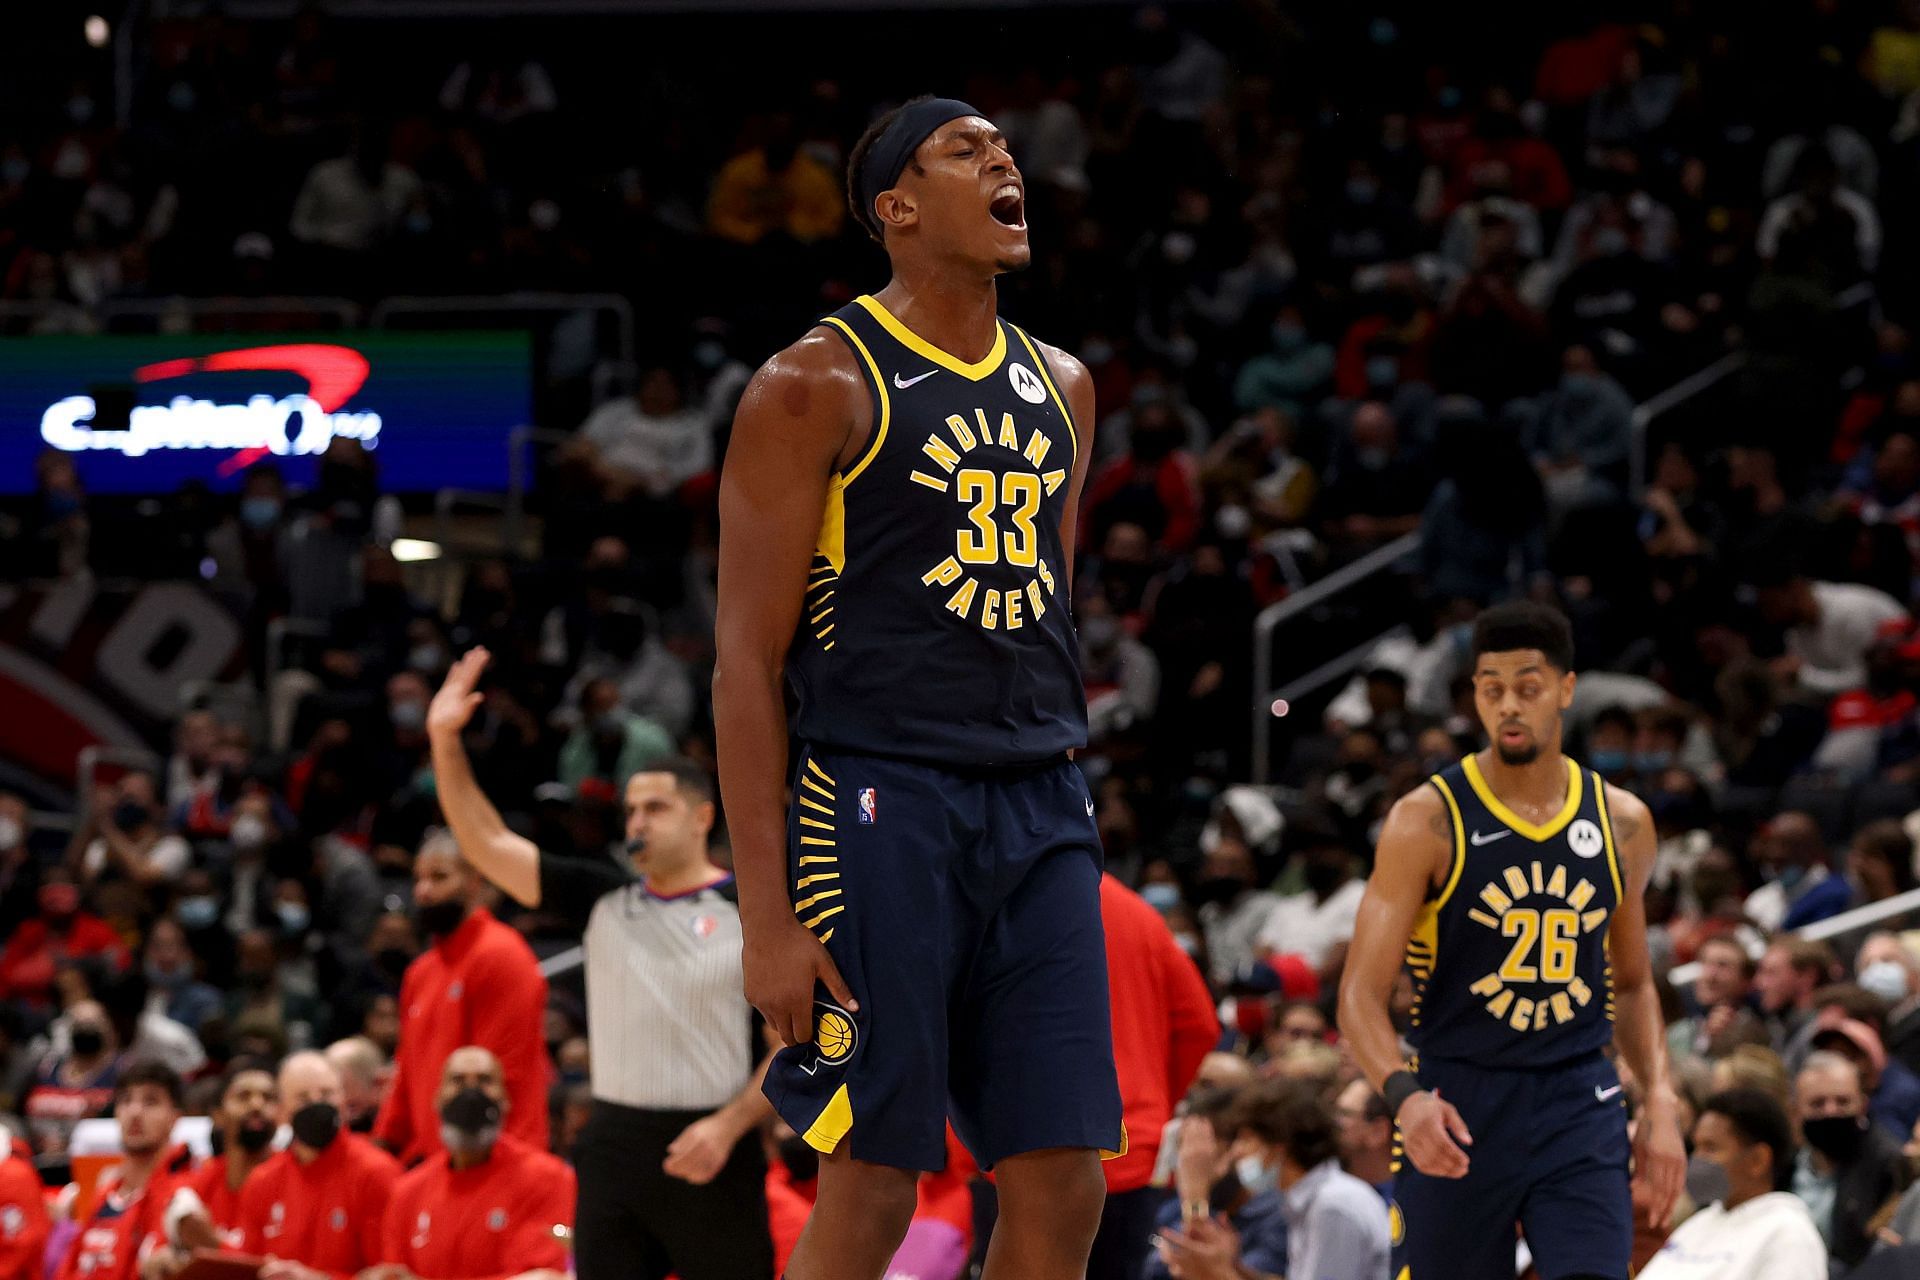 Myles Turner in action during the Indiana Pacers vs Washington Wizards game